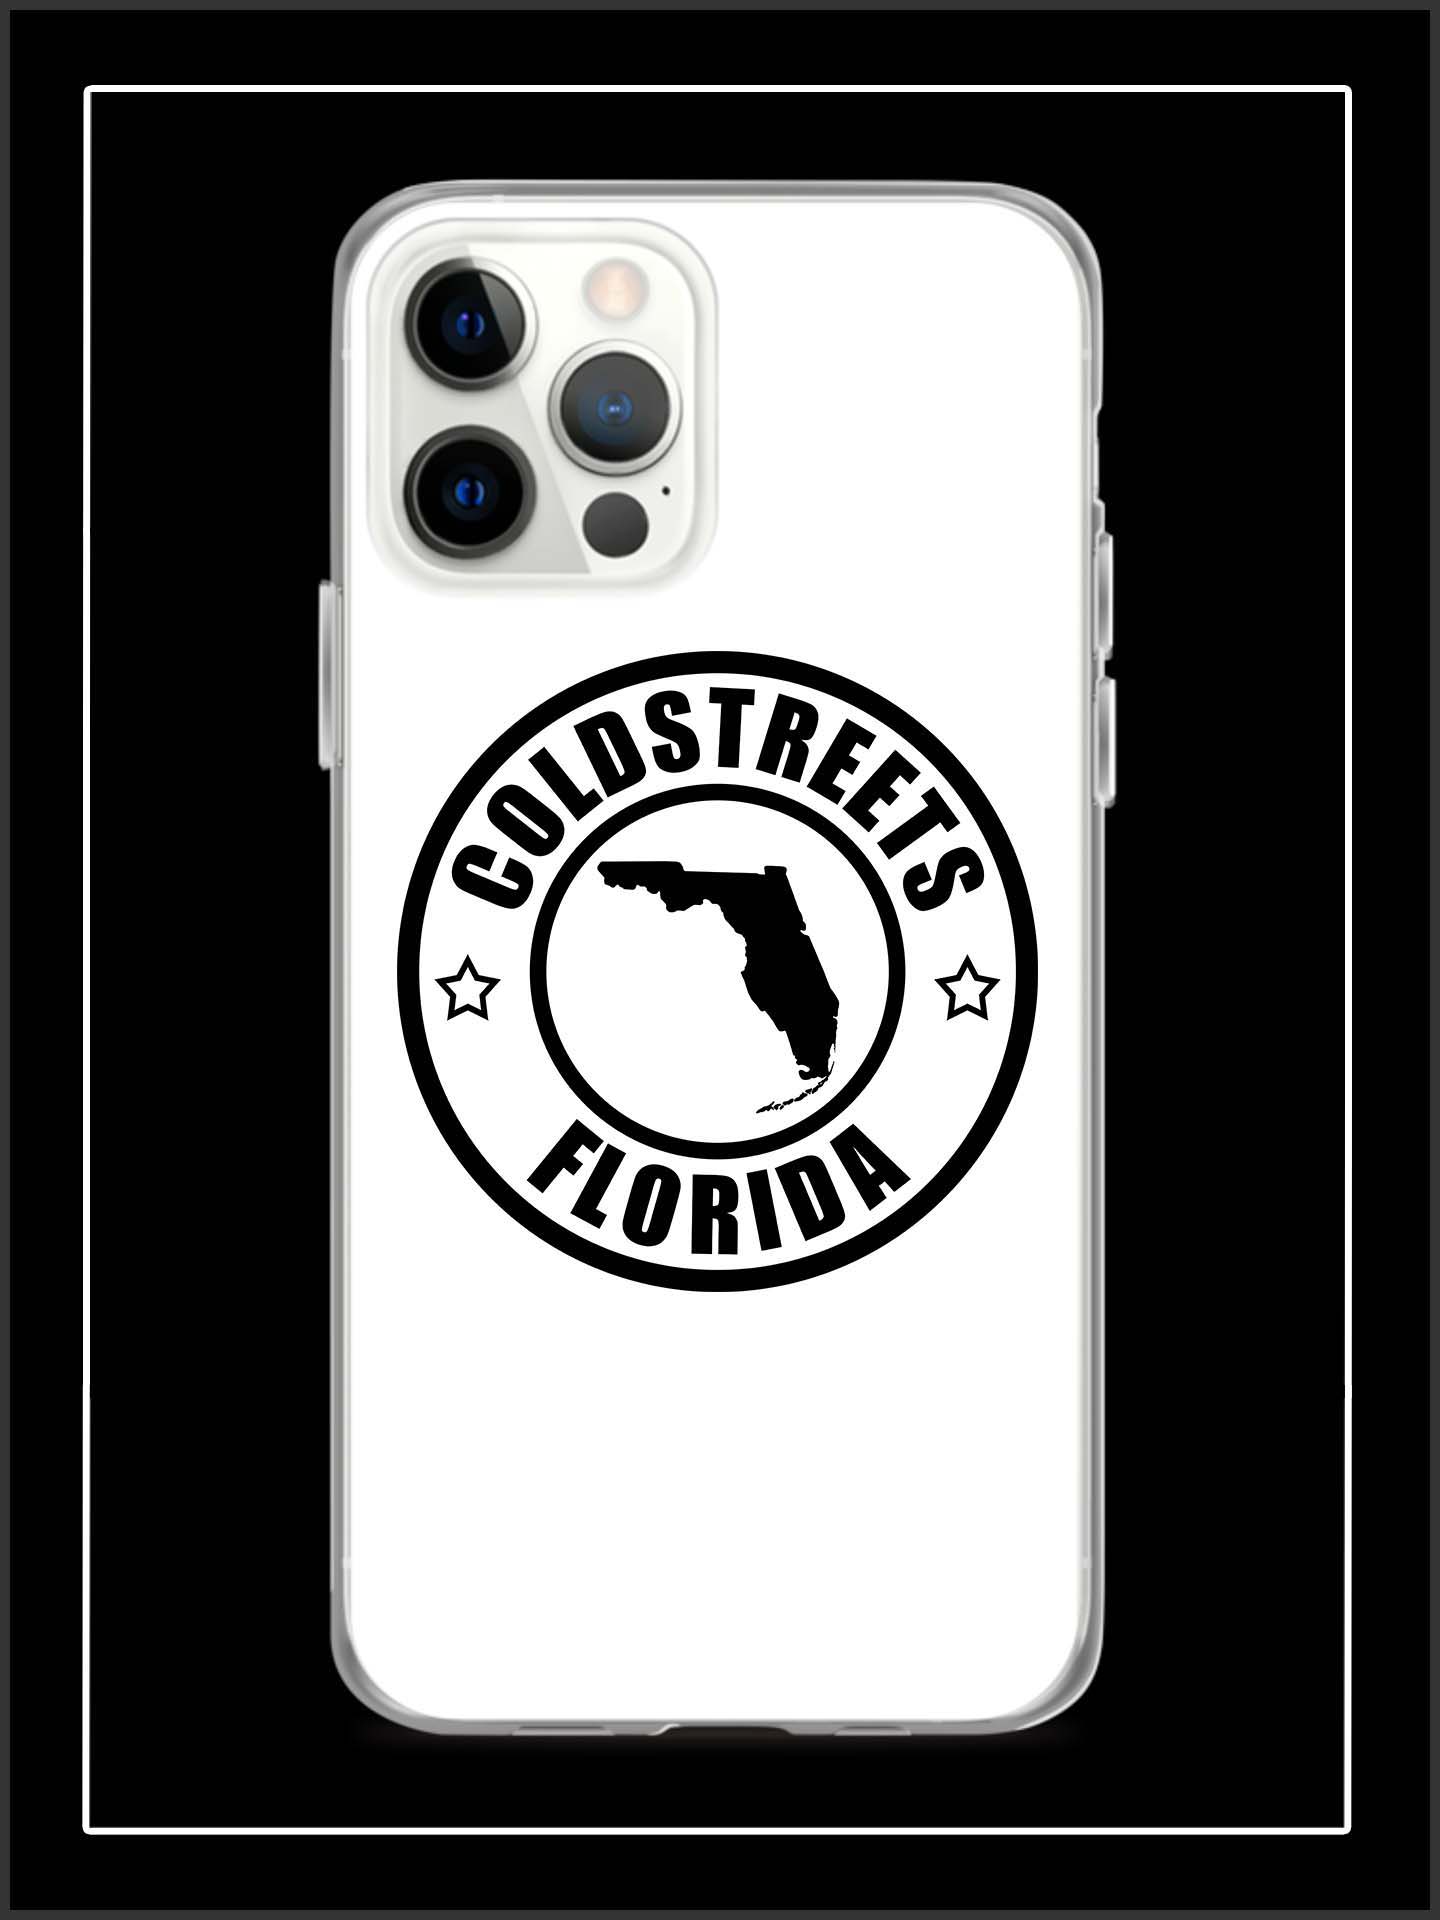 Cold Streets Florida iPhone Cases